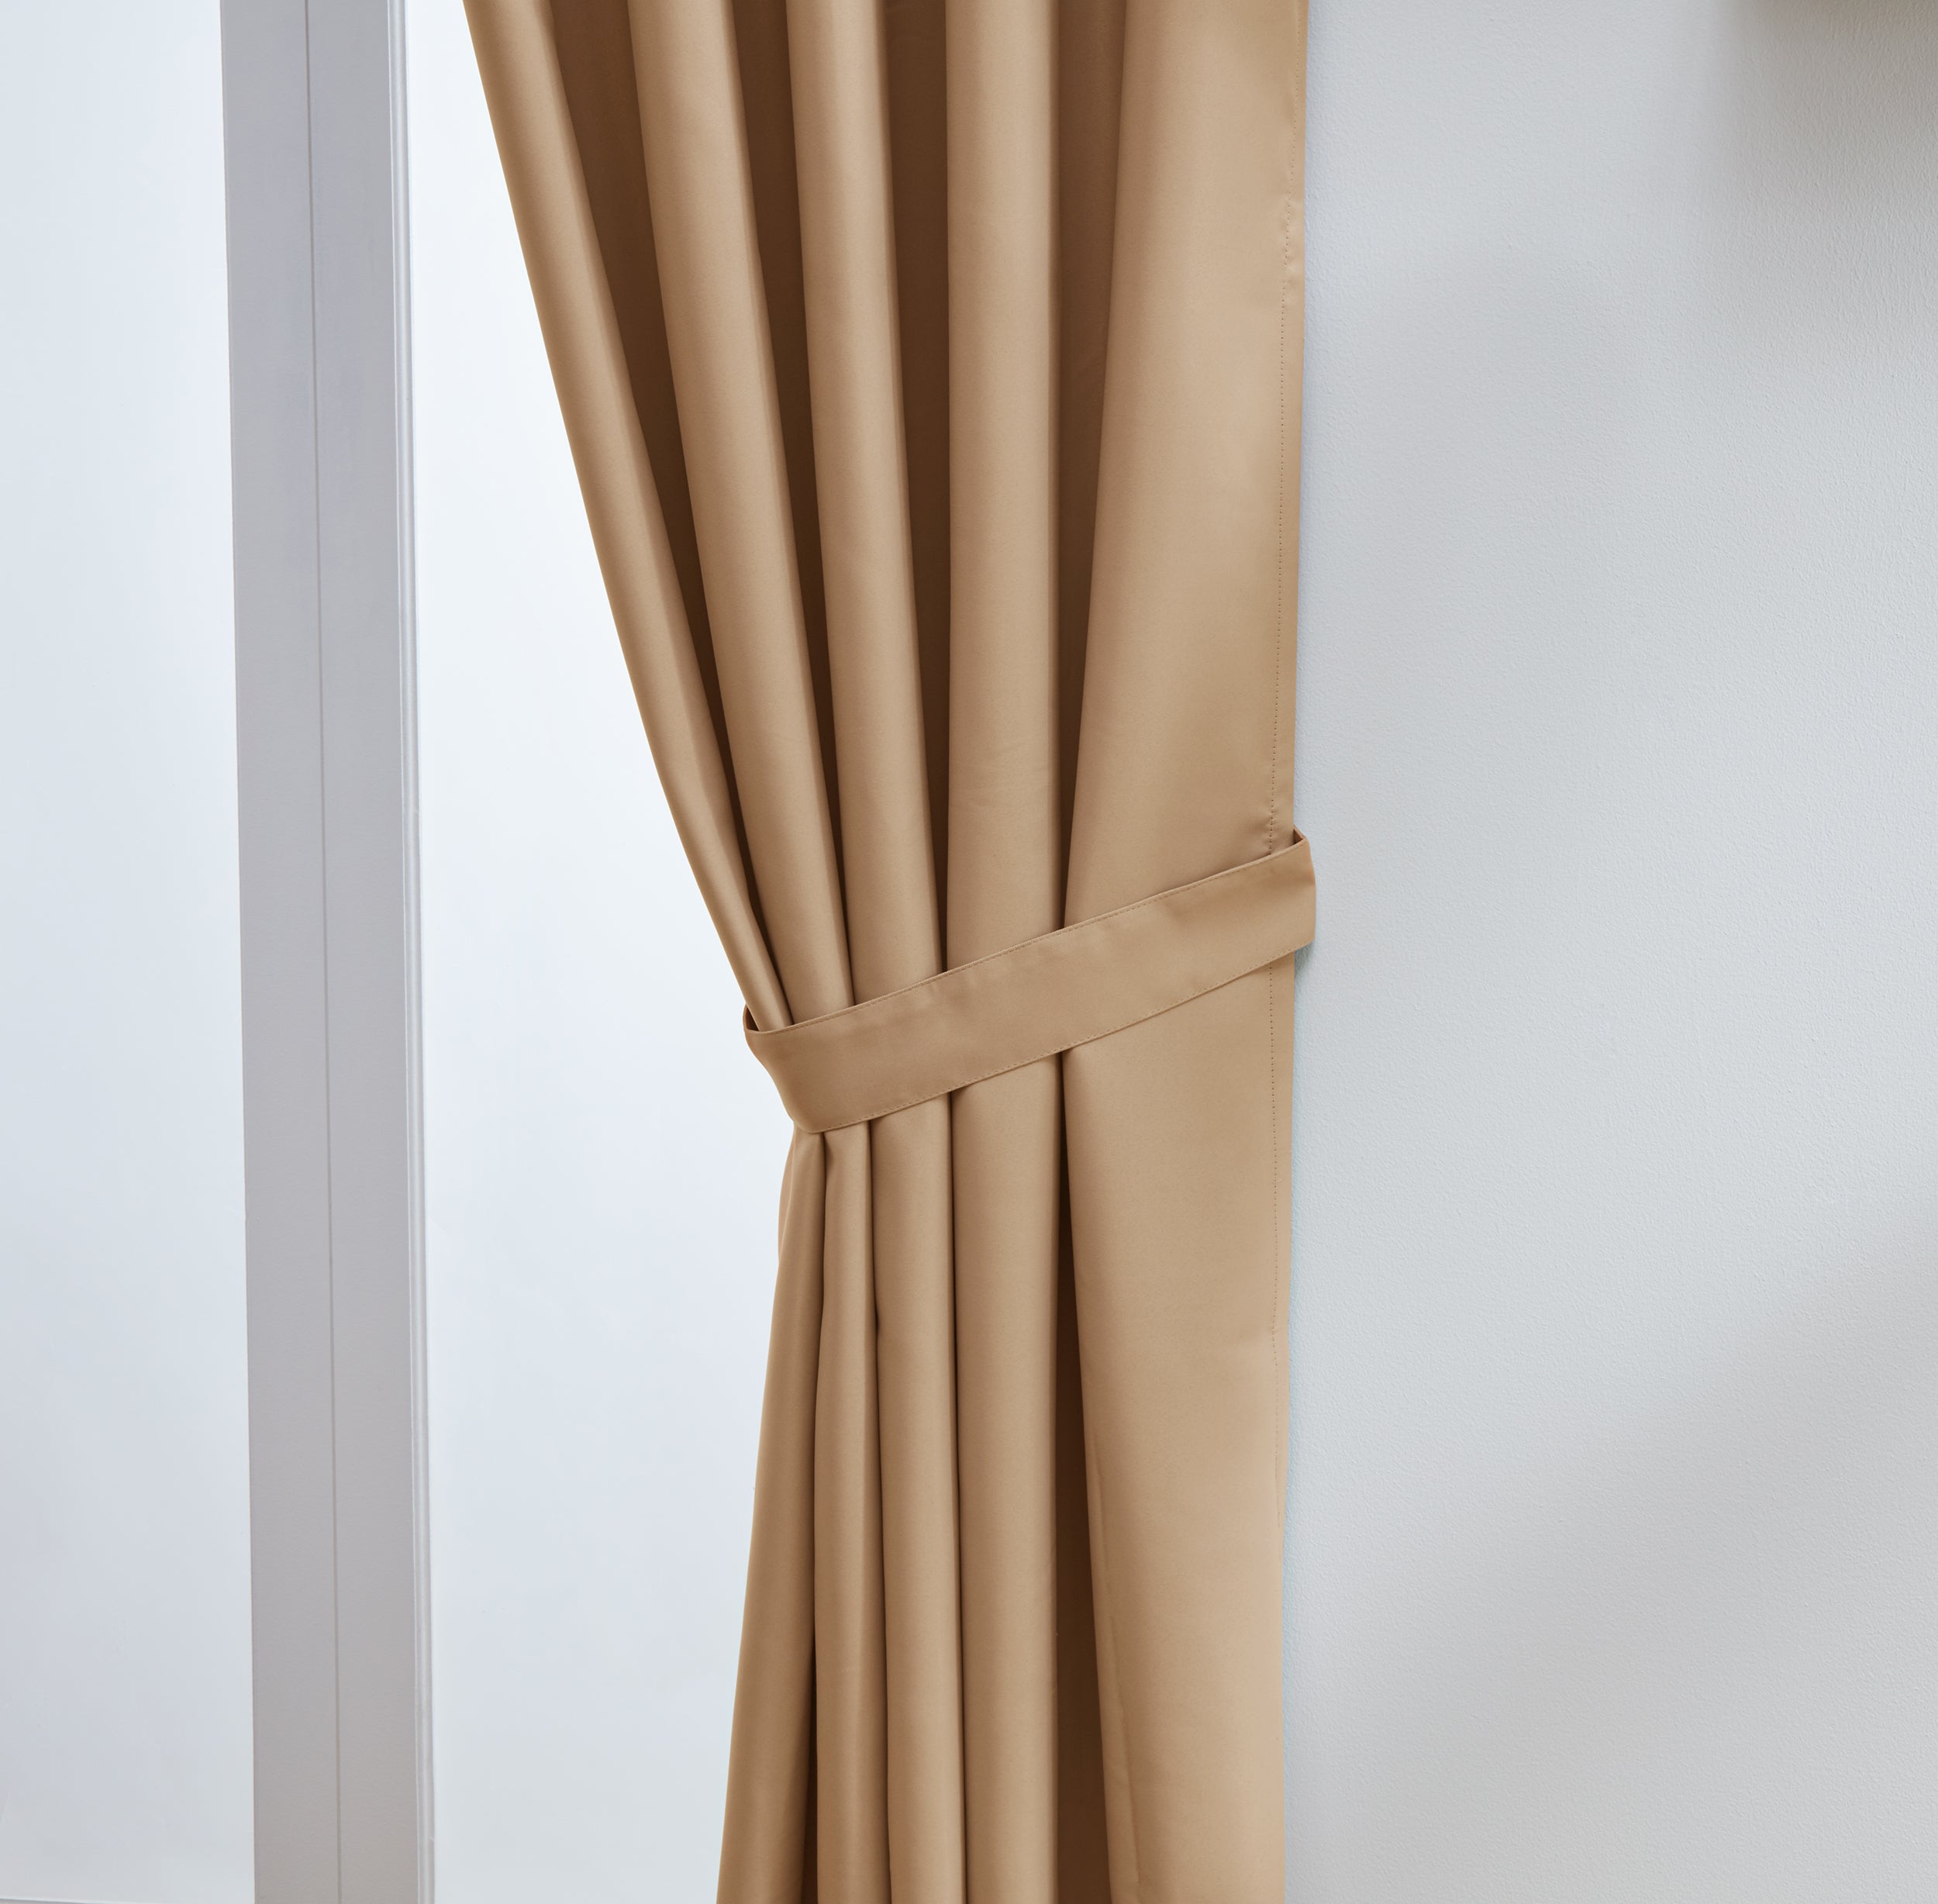 Thermal Blackout Ready Made Tape Top Curtains + Tie Backs (Natural)